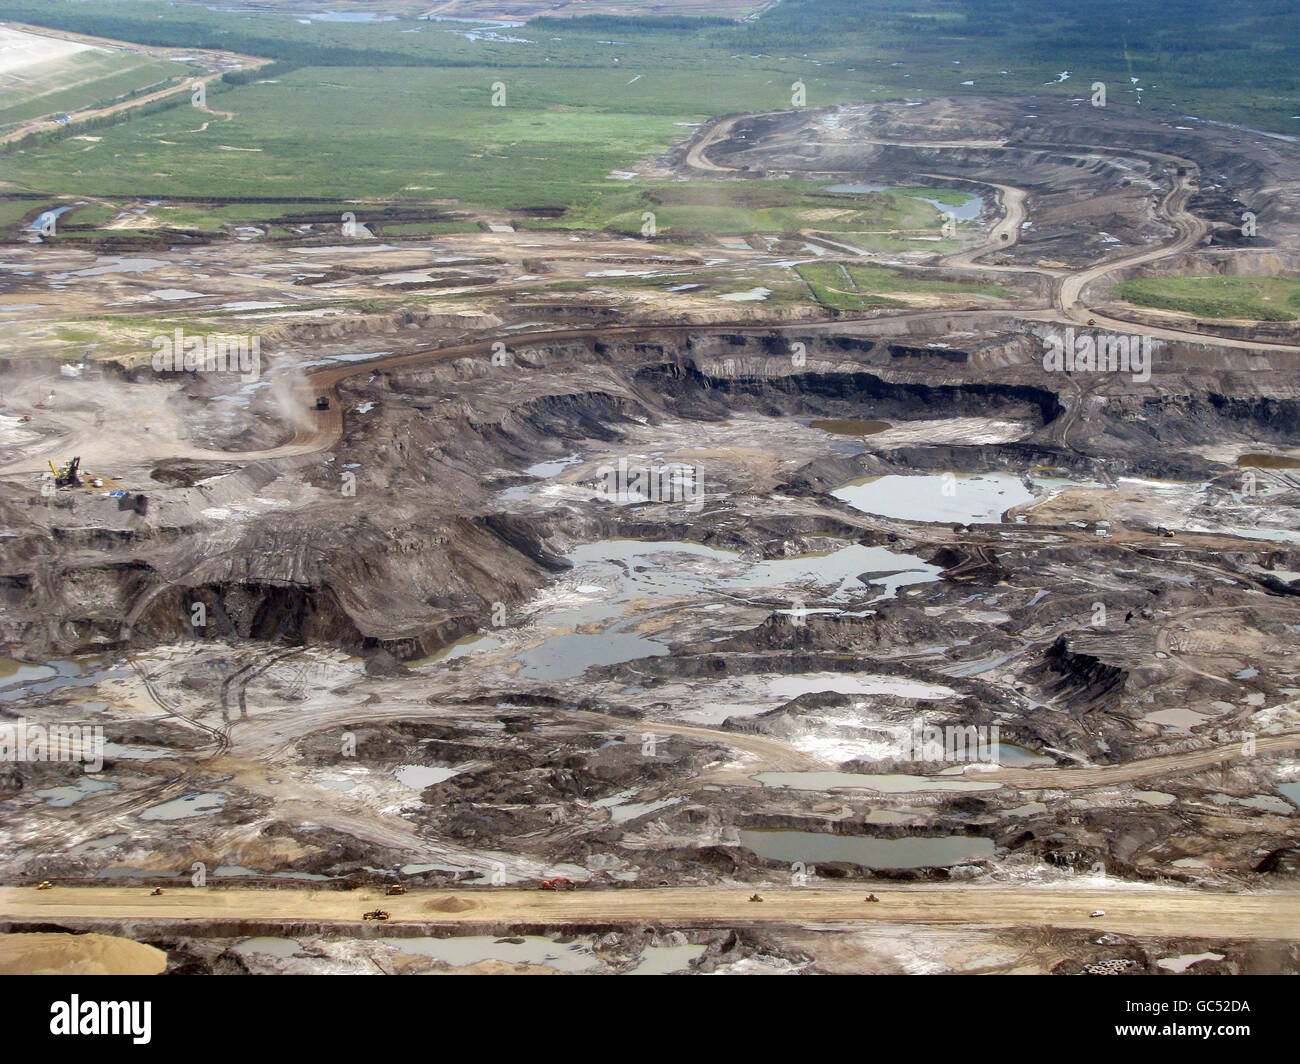 Aerial view of an open cast mine near Fort McMurray, Alberta, Canada, which is being used to extract oil from the Athabasca tar sands fields. Stock Photo